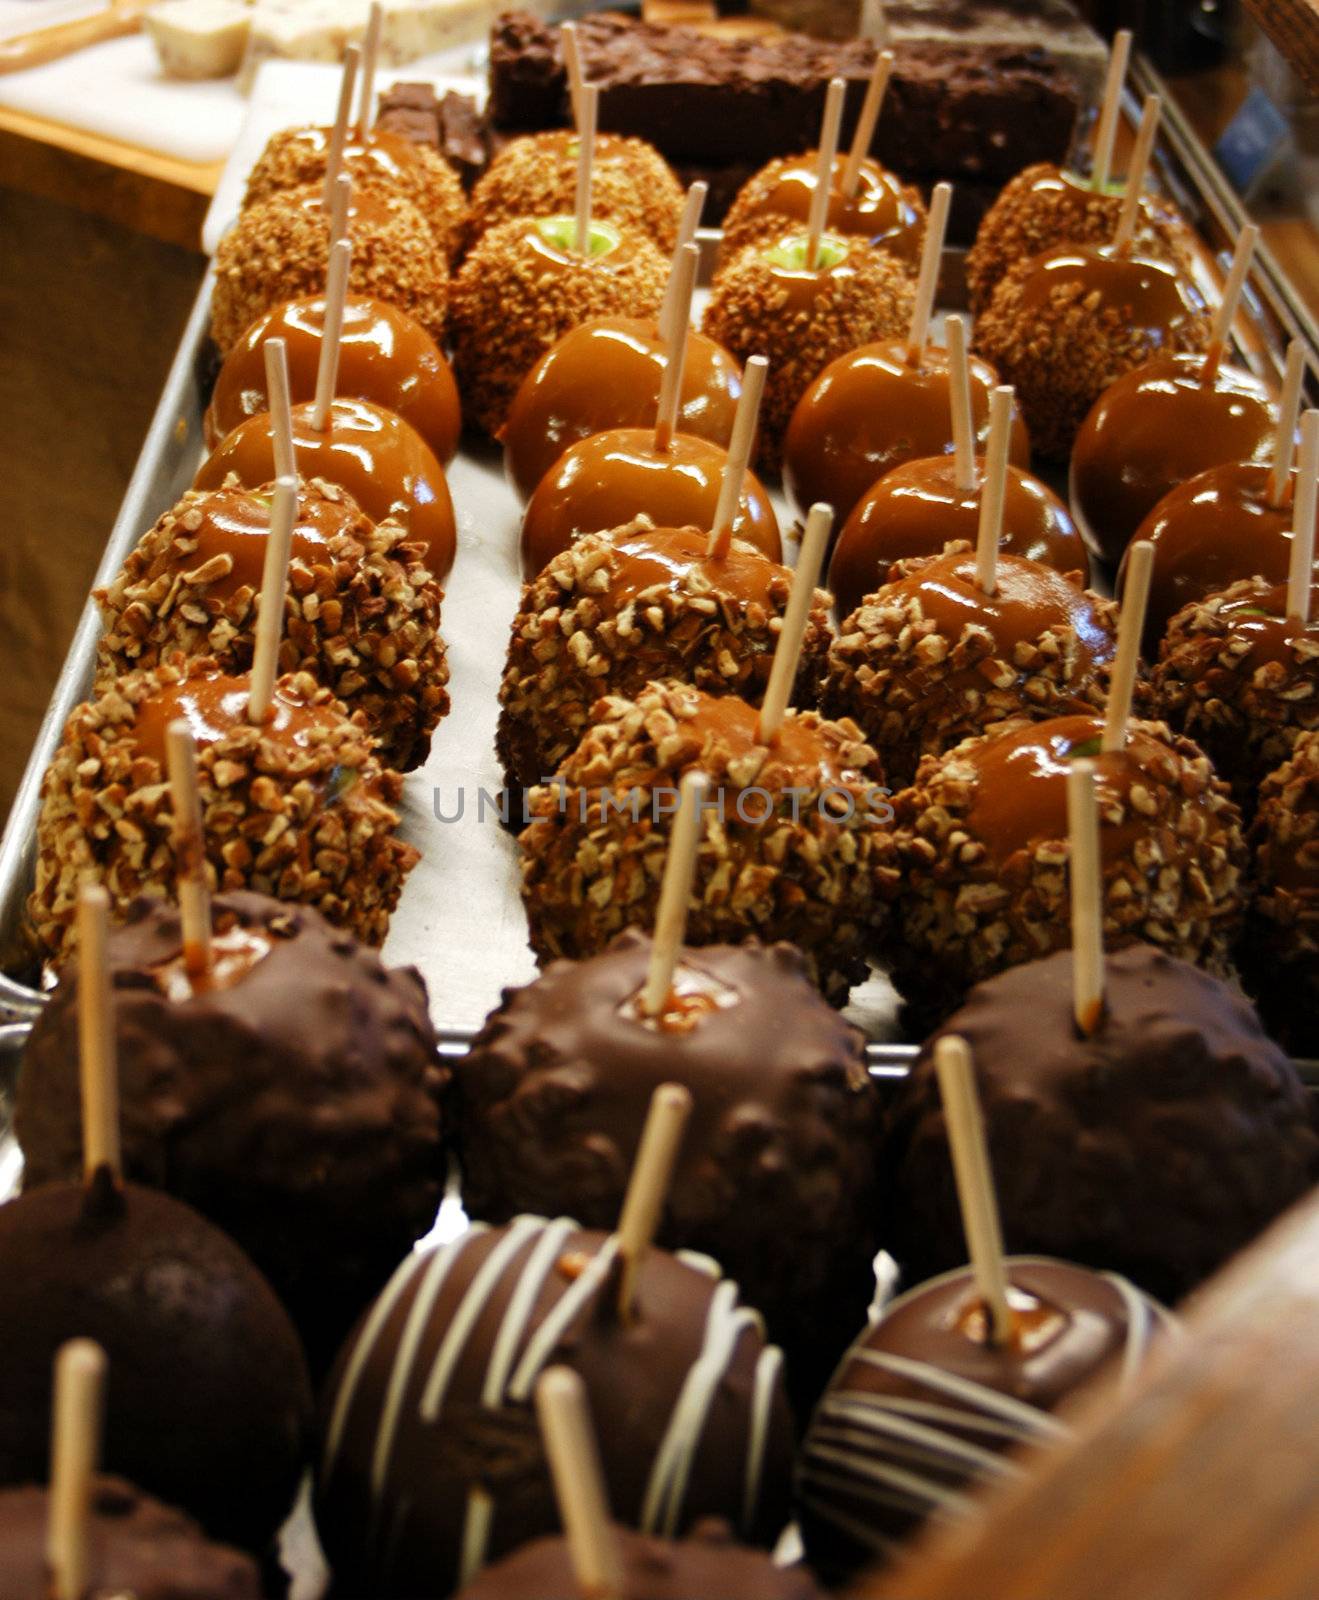 Candy apples in the sweets shop